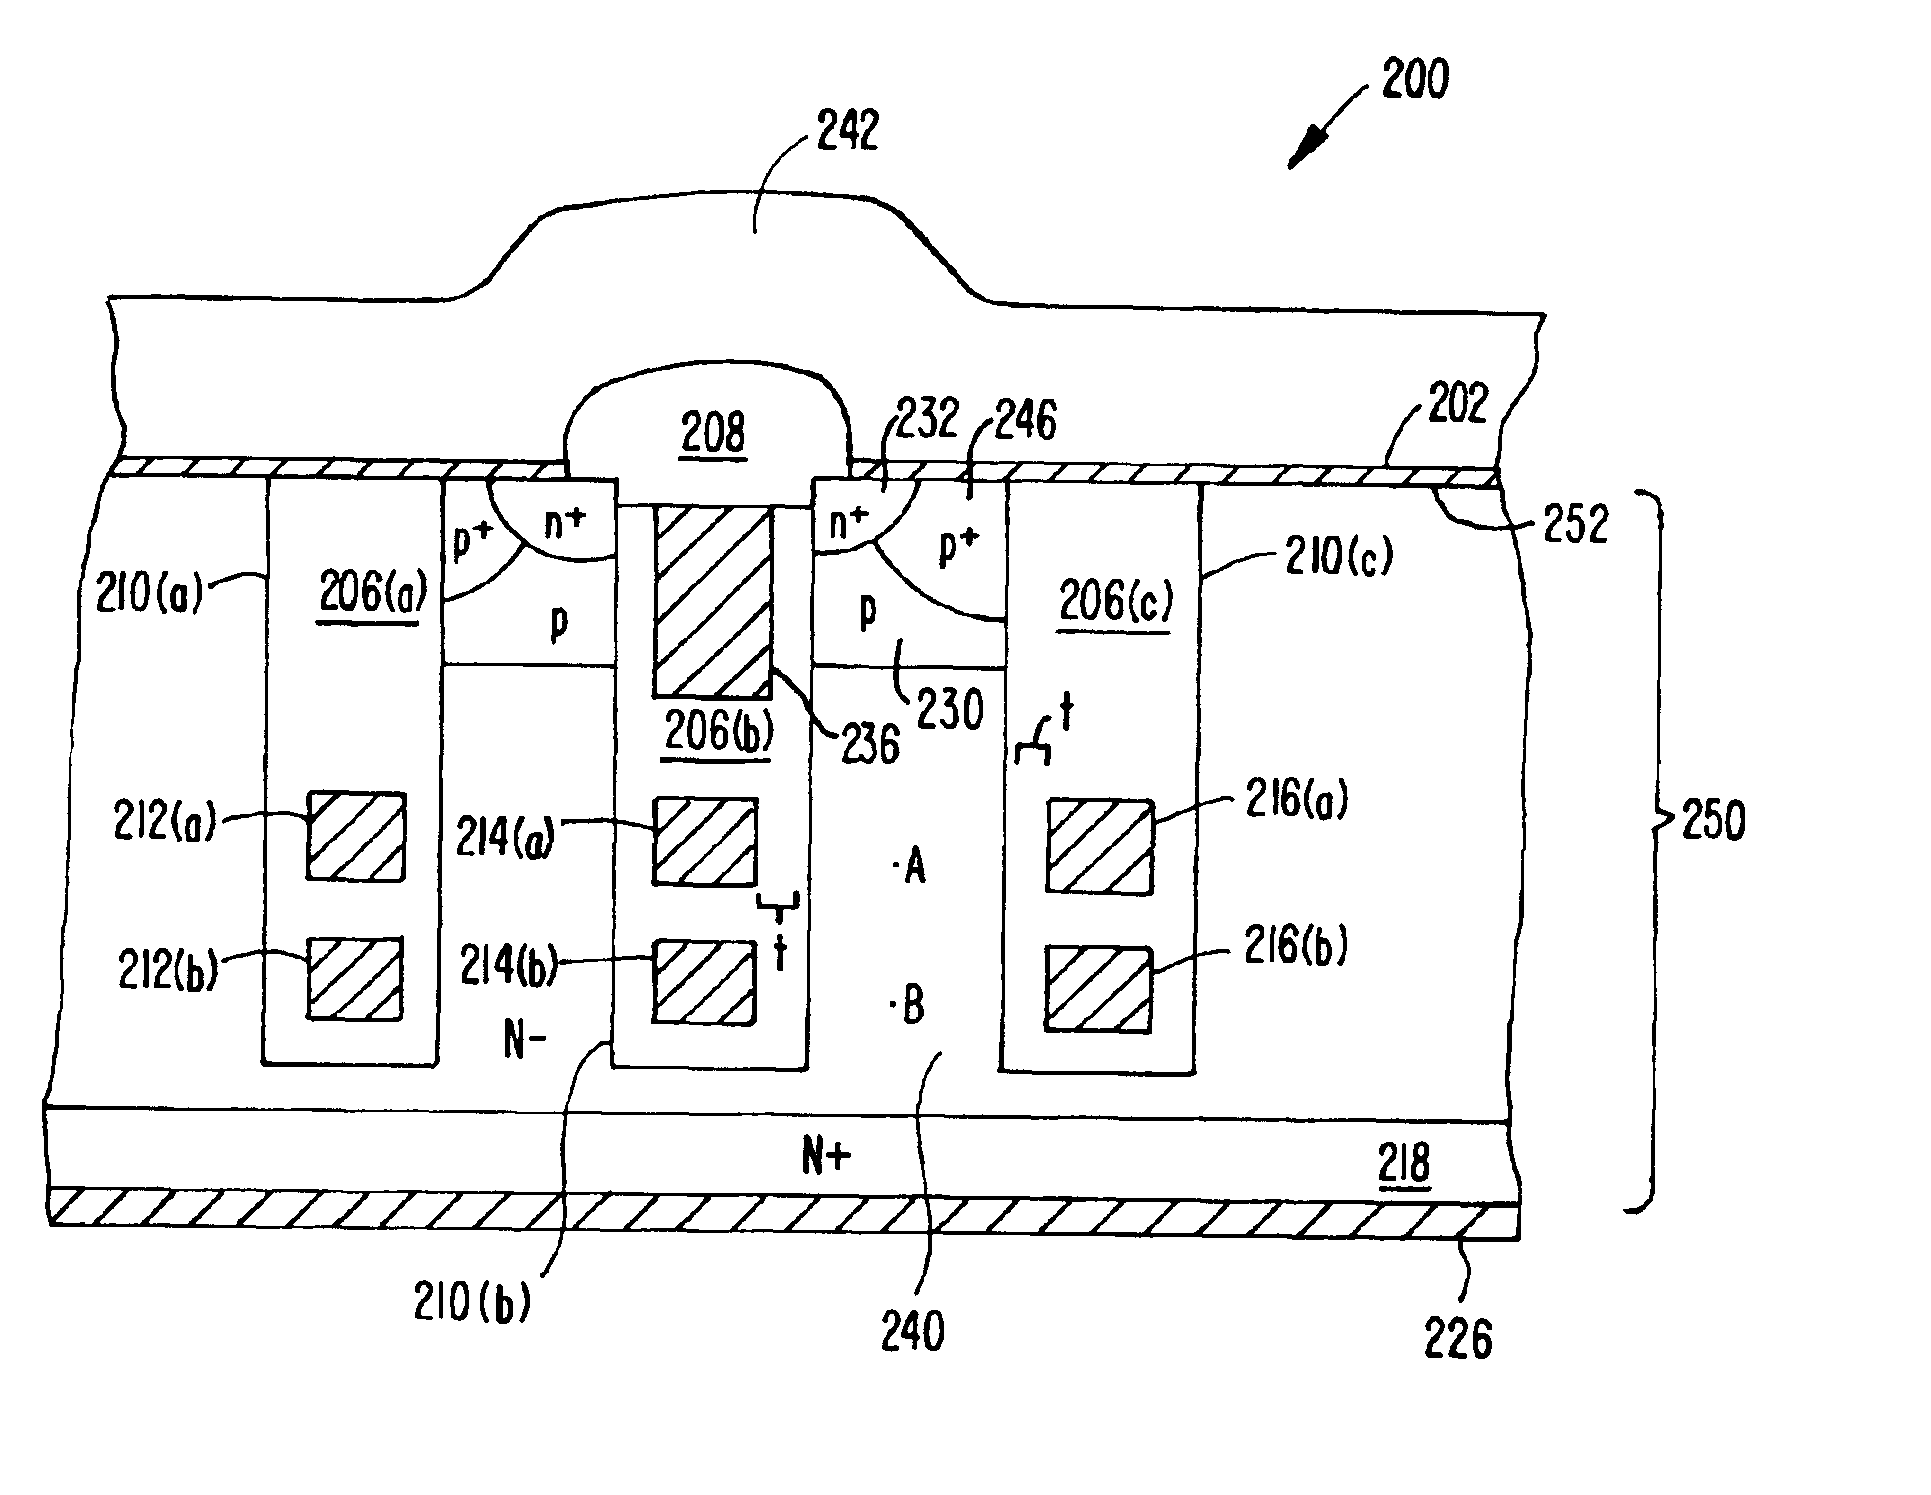 Method for forming a semiconductor structure with improved smaller forward voltage loss and higher blocking capability